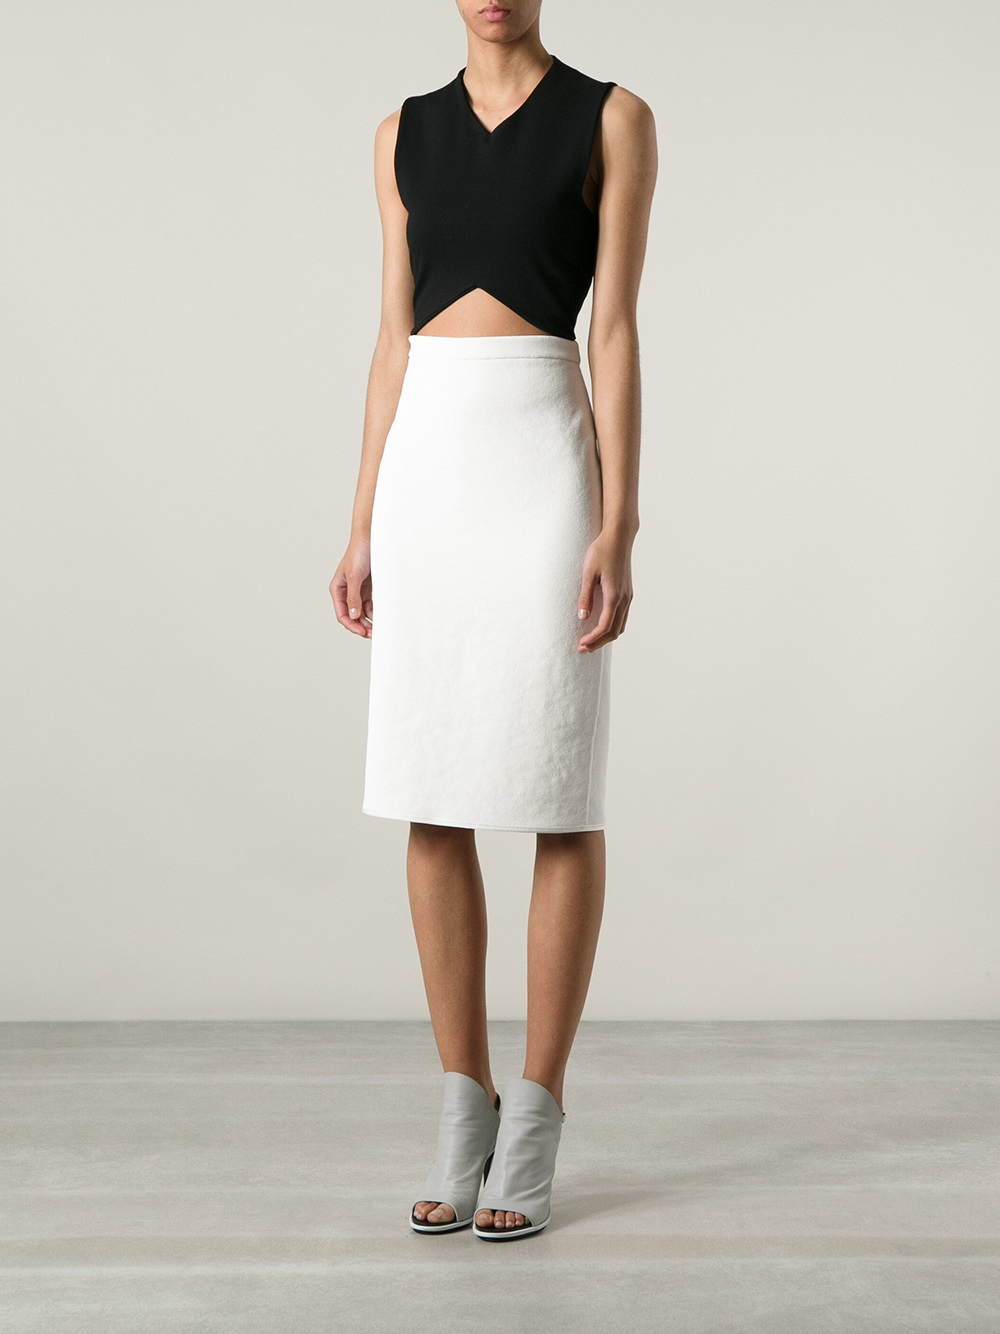 Lyst - Theyskens' Theory High Waisted Pencil Skirt in White